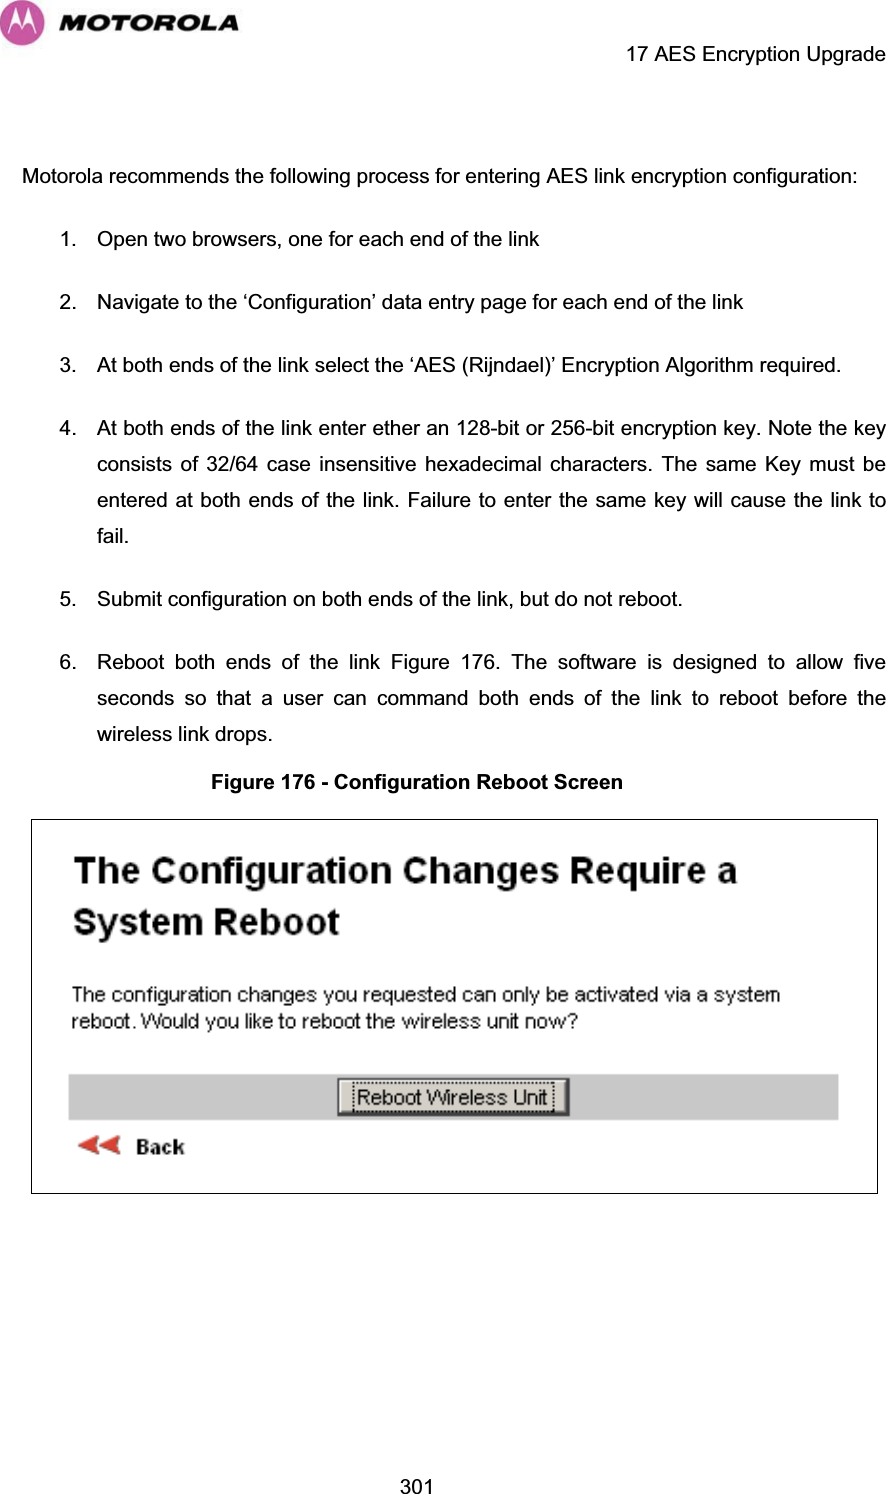     17 AES Encryption Upgrade  301 Motorola recommends the following process for entering AES link encryption configuration: 1.  Open two browsers, one for each end of the link 2.  Navigate to the ‘Configuration’ data entry page for each end of the link 3.  At both ends of the link select the ‘AES (Rijndael)’ Encryption Algorithm required. 4.  At both ends of the link enter ether an 128-bit or 256-bit encryption key. Note the key consists of 32/64 case insensitive hexadecimal characters. The same Key must be entered at both ends of the link. Failure to enter the same key will cause the link to fail. 5.  Submit configuration on both ends of the link, but do not reboot. 6.  Reboot both ends of the link Figure 176. The software is designed to allow five seconds so that a user can command both ends of the link to reboot before the wireless link drops. Figure 176 - Configuration Reboot Screen   